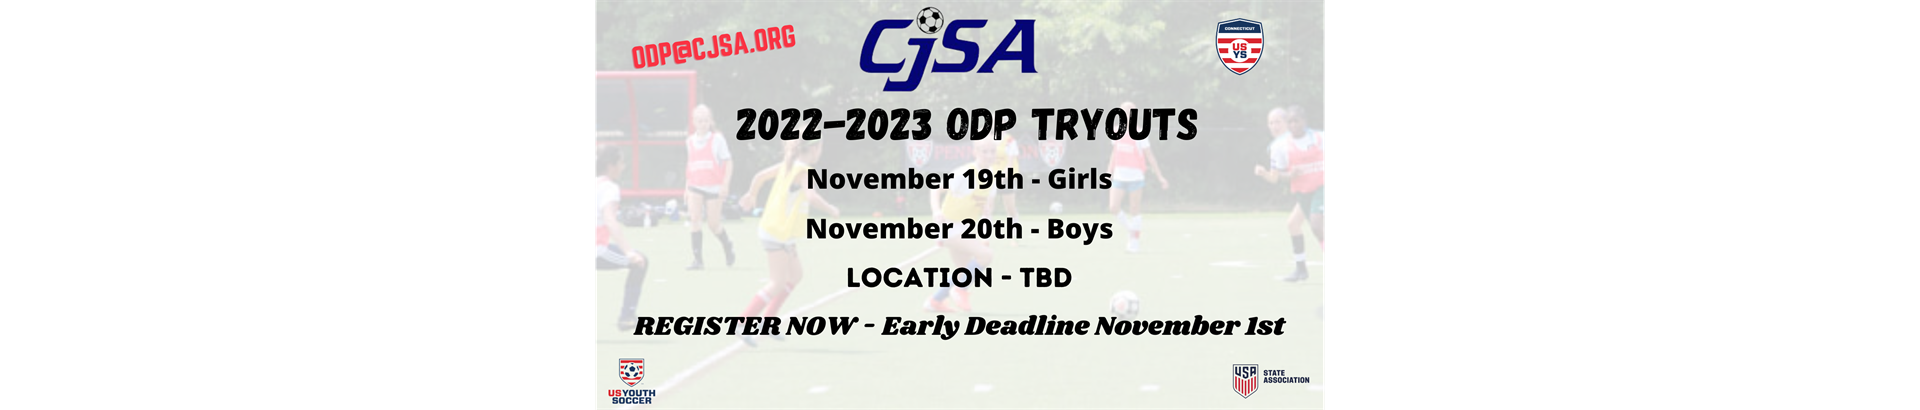 2022-2023 ODP Tryouts